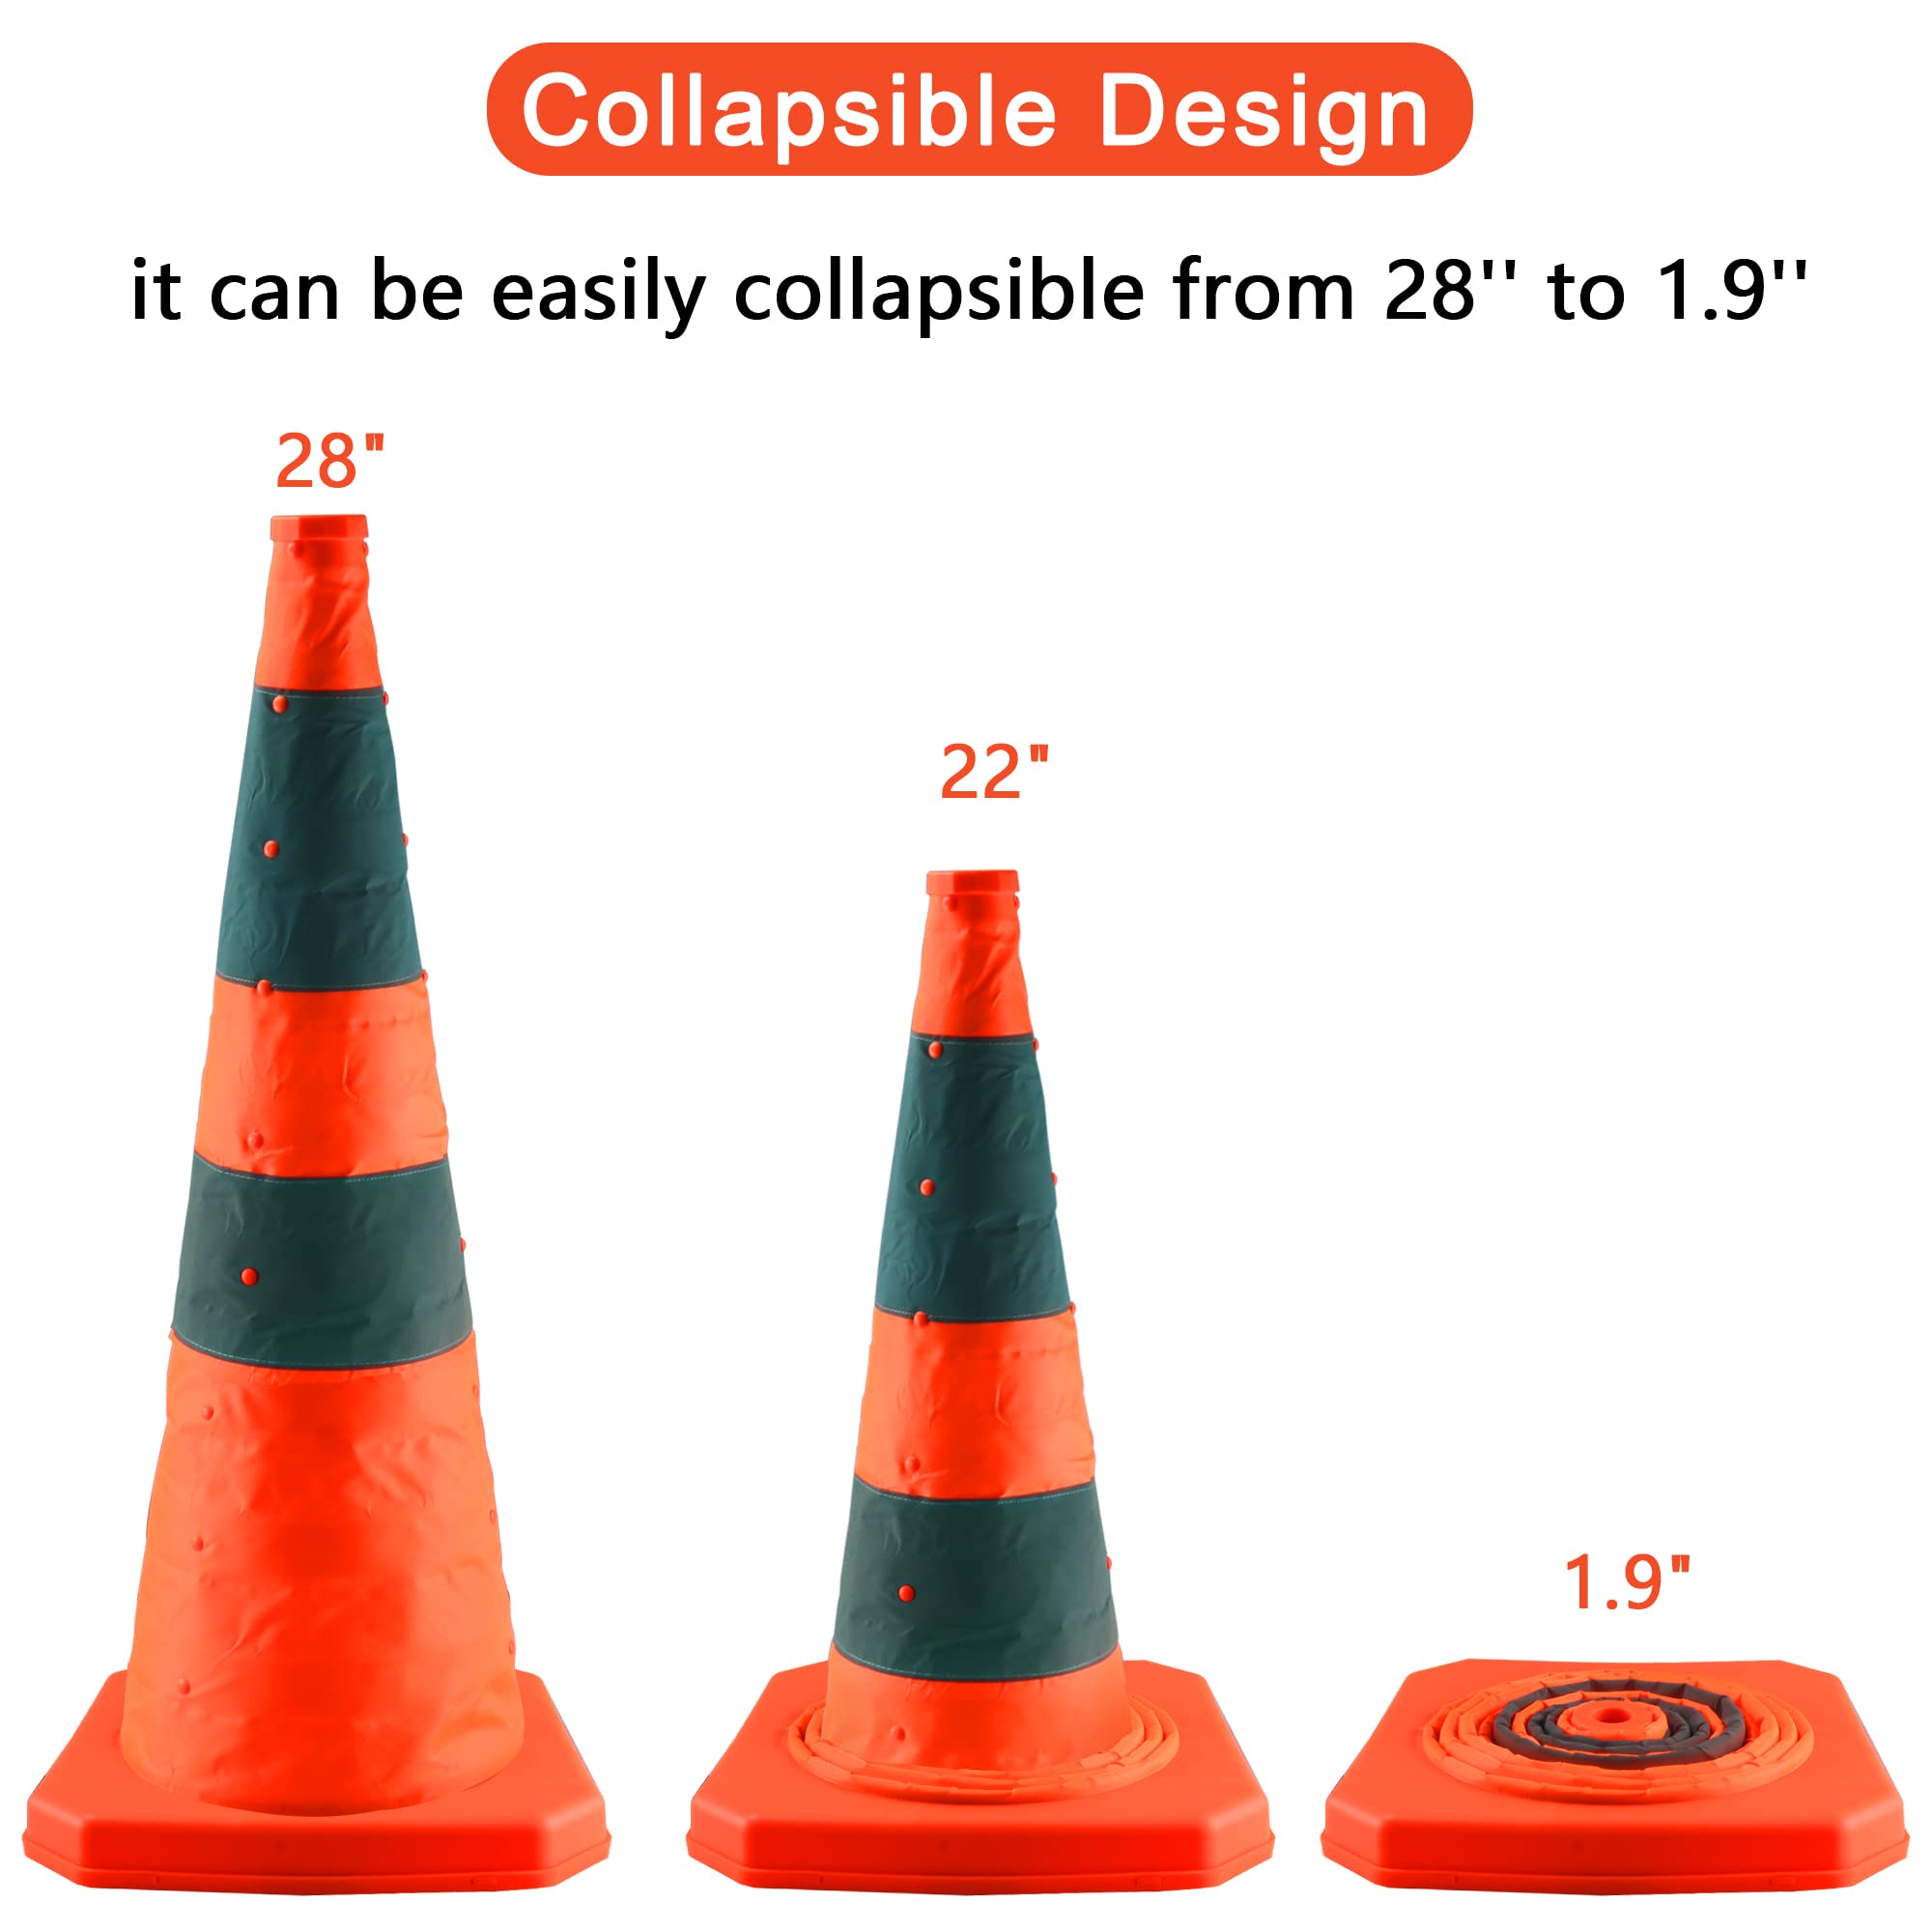 28 inch Collapsible Traffic Cones, 2 Pack Parking Cones| Safety Cones| Road Cones, Orange Cones with Reflective Collars, Pop up Construction Cones for Parking Lot & Driving Practice